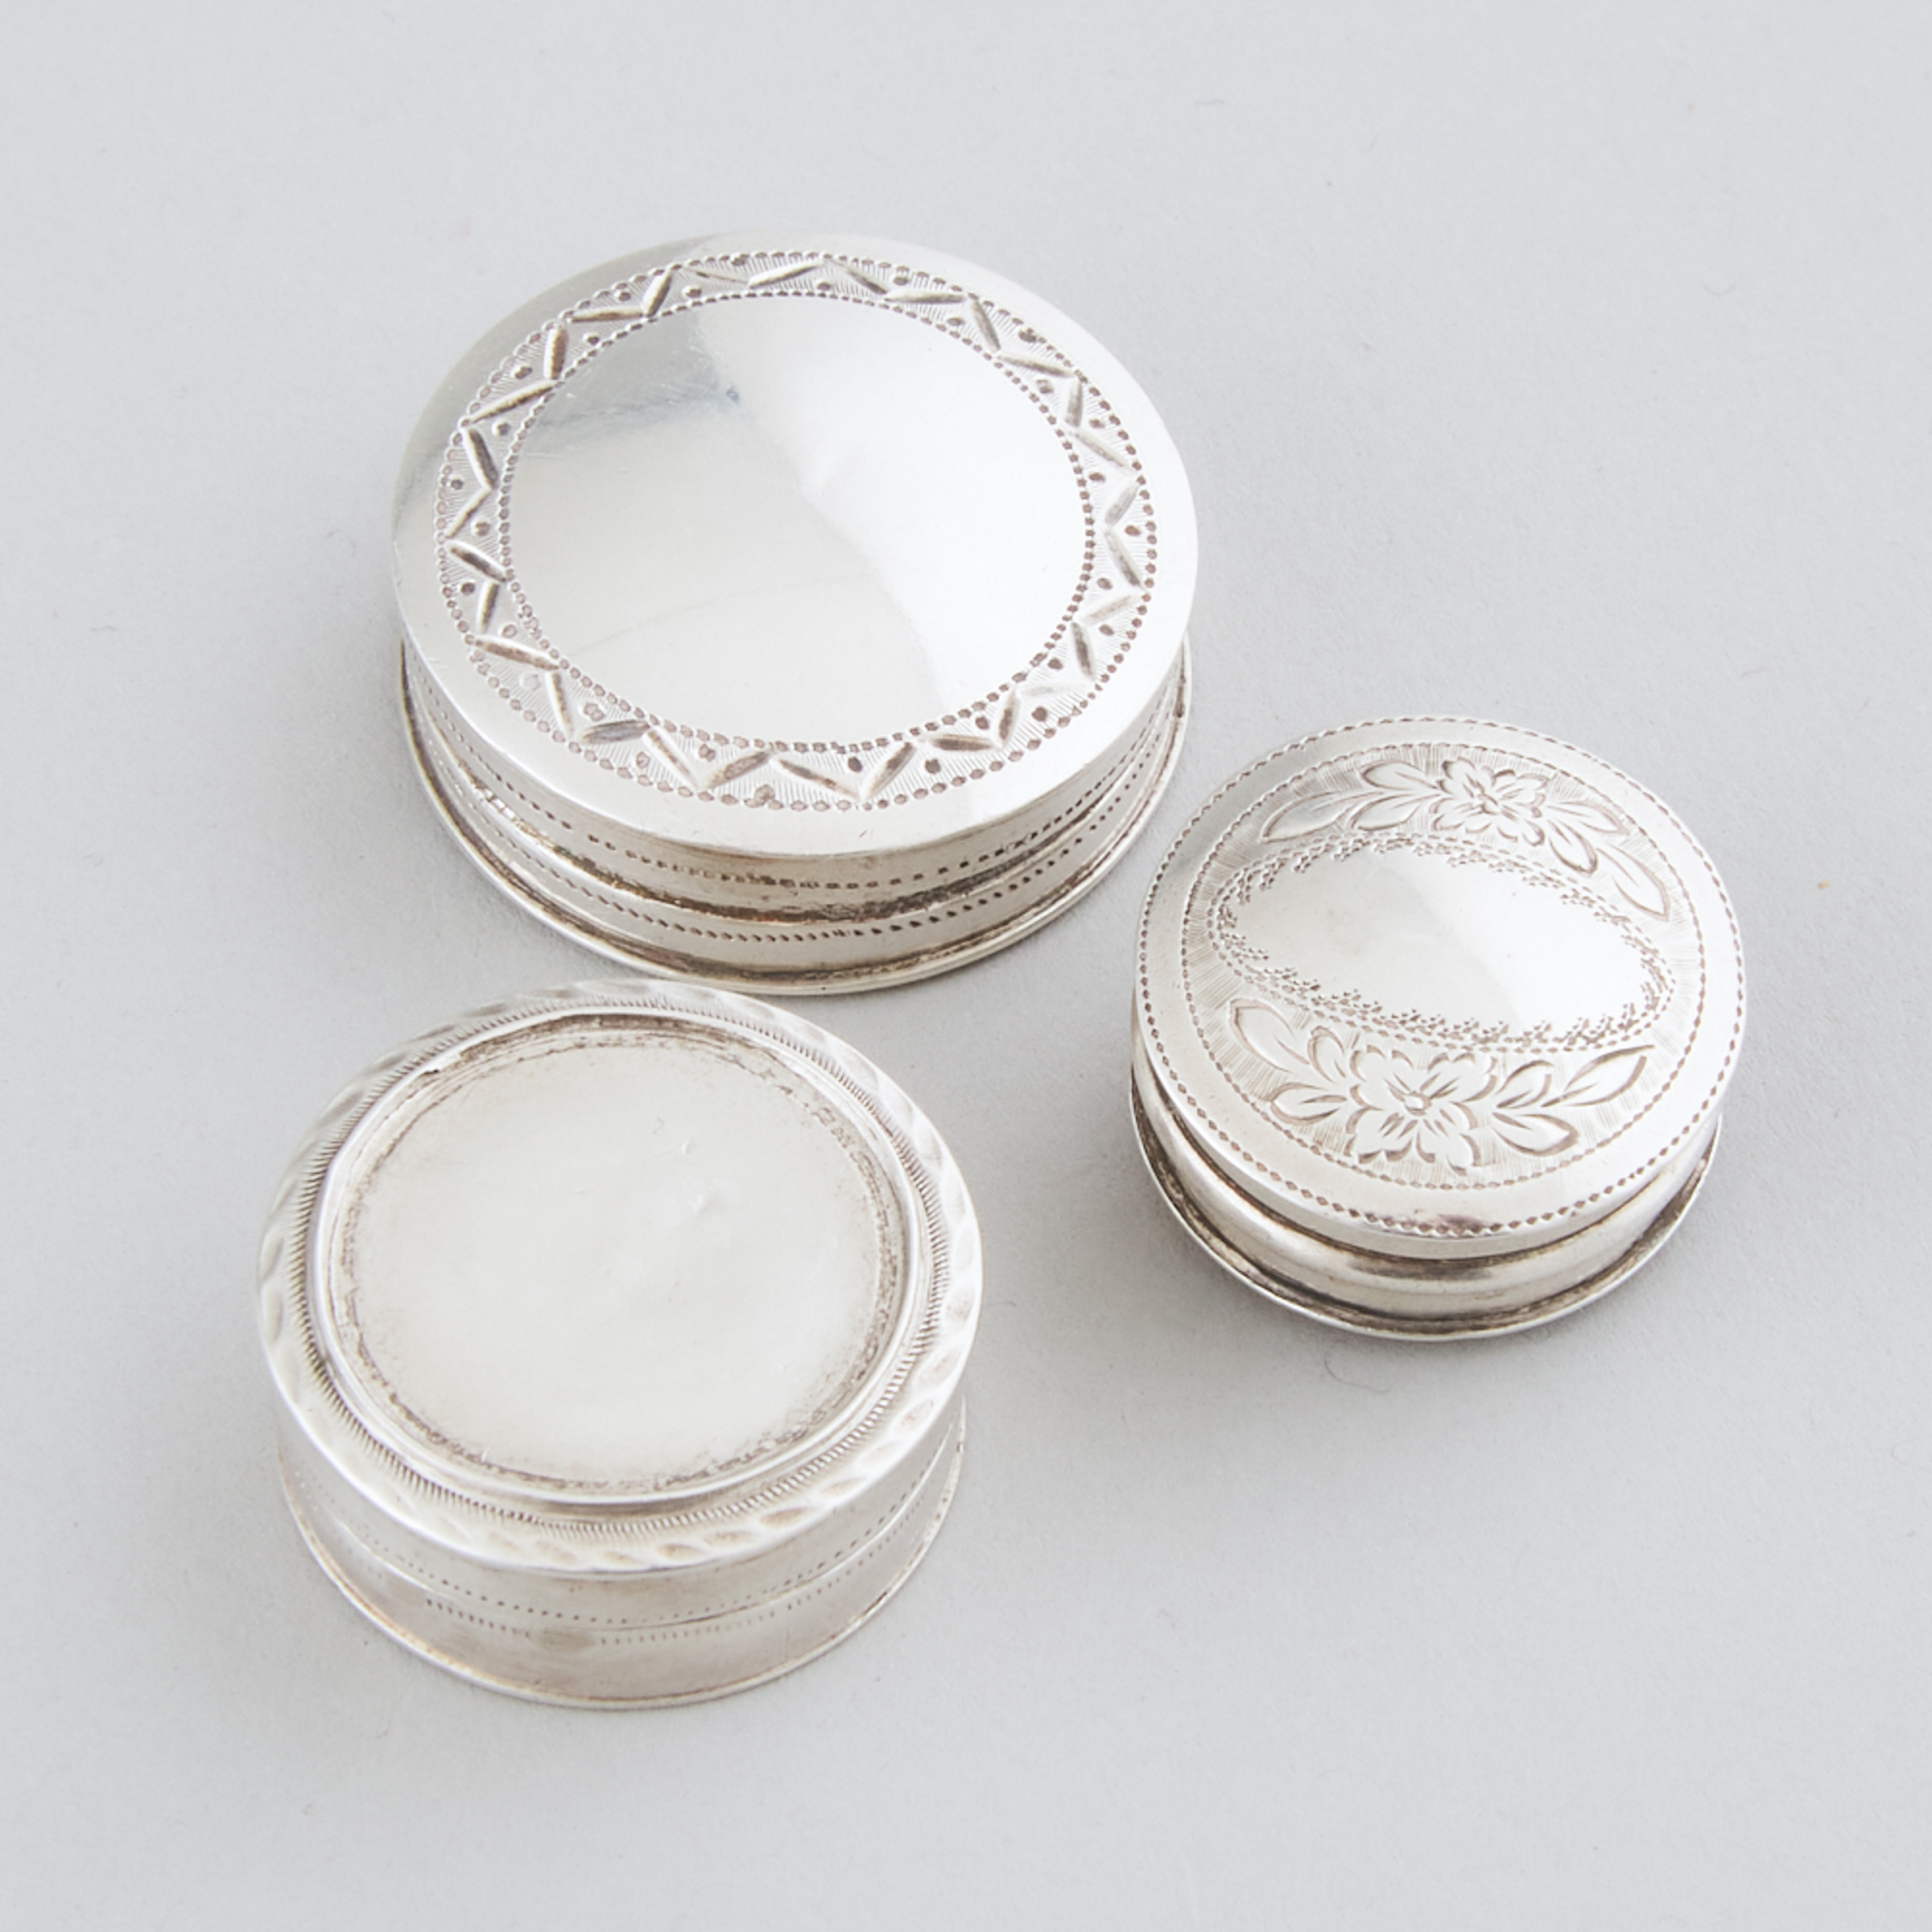 Three George III Silver Counter Boxes, two by Joseph Taylor, Birmingham, c.1800